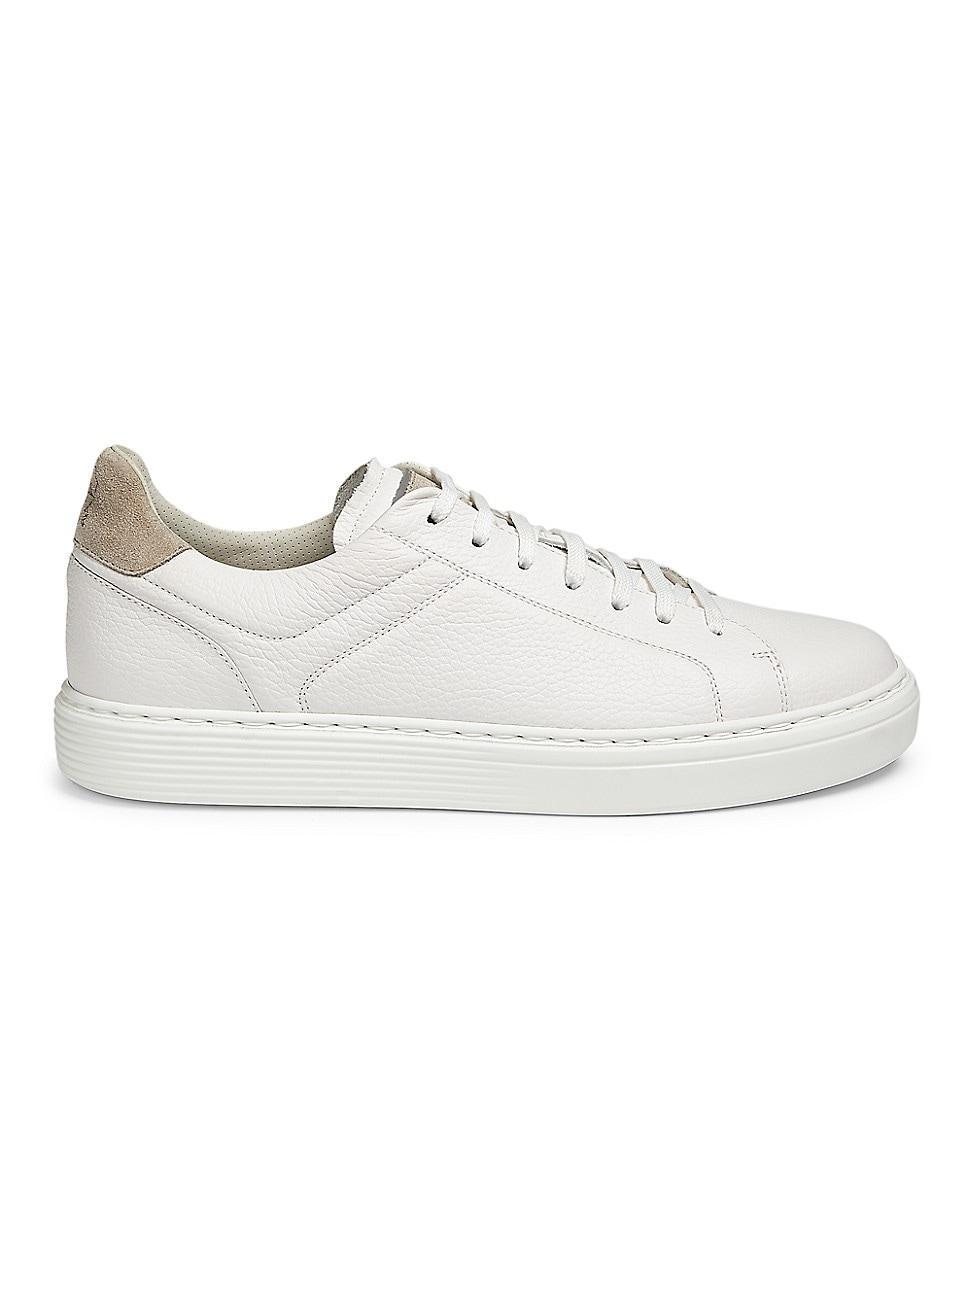 Mens Grained Calfskin Low-Top Sneakers Product Image